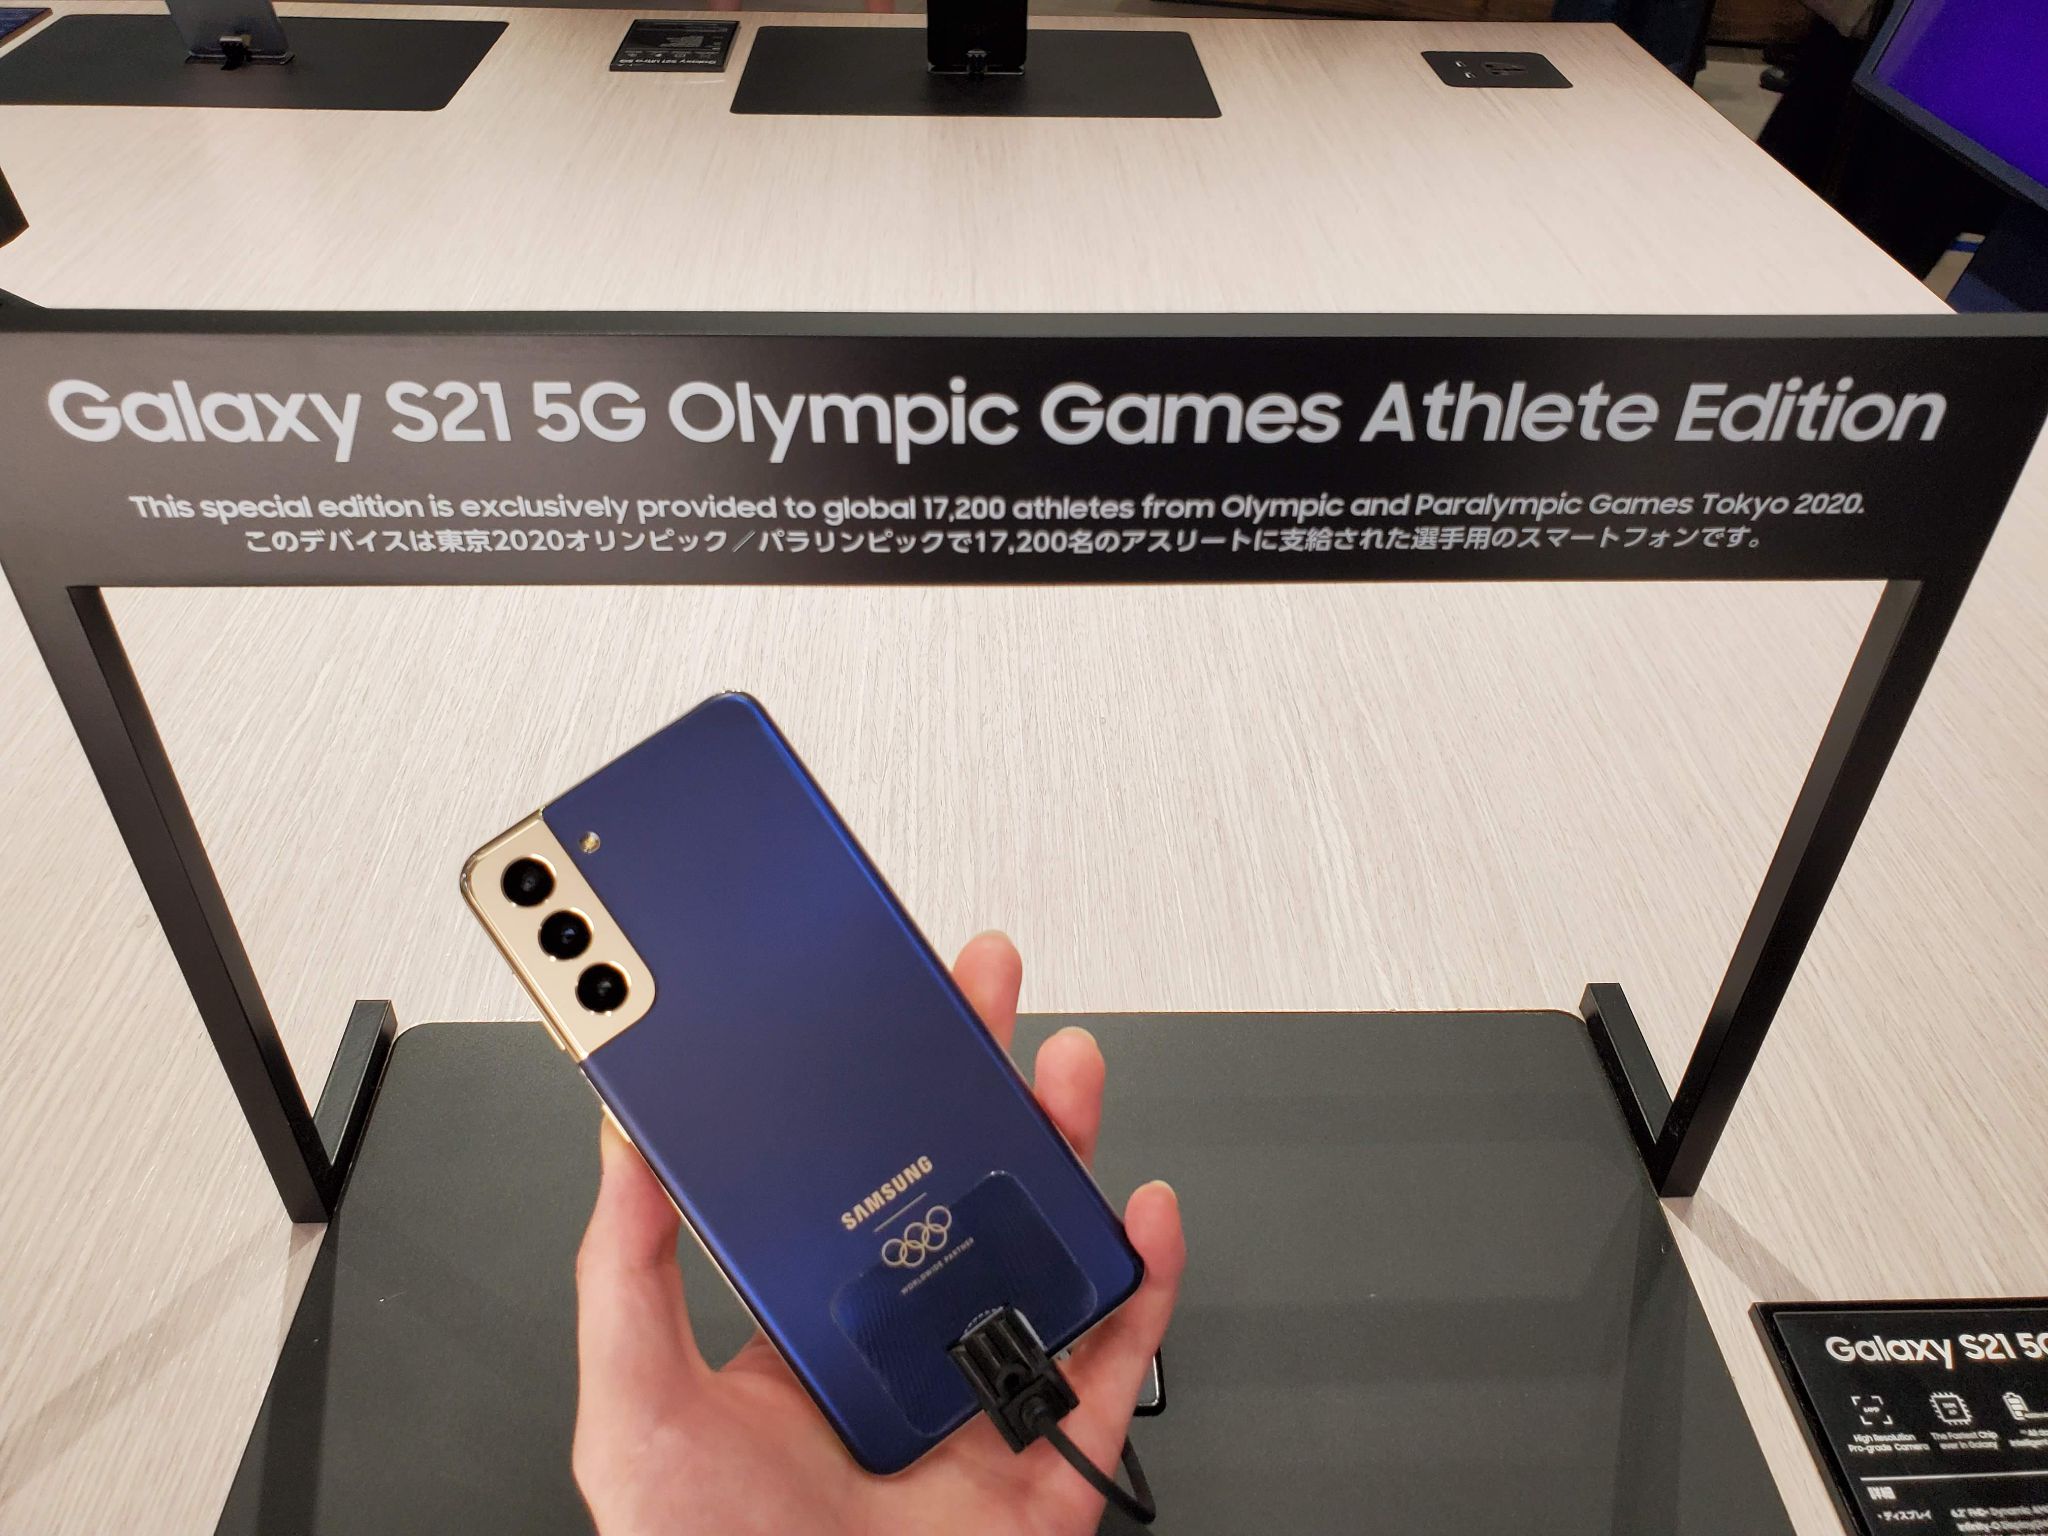 Galaxy S21 5G Olympic Games Athlete Edition